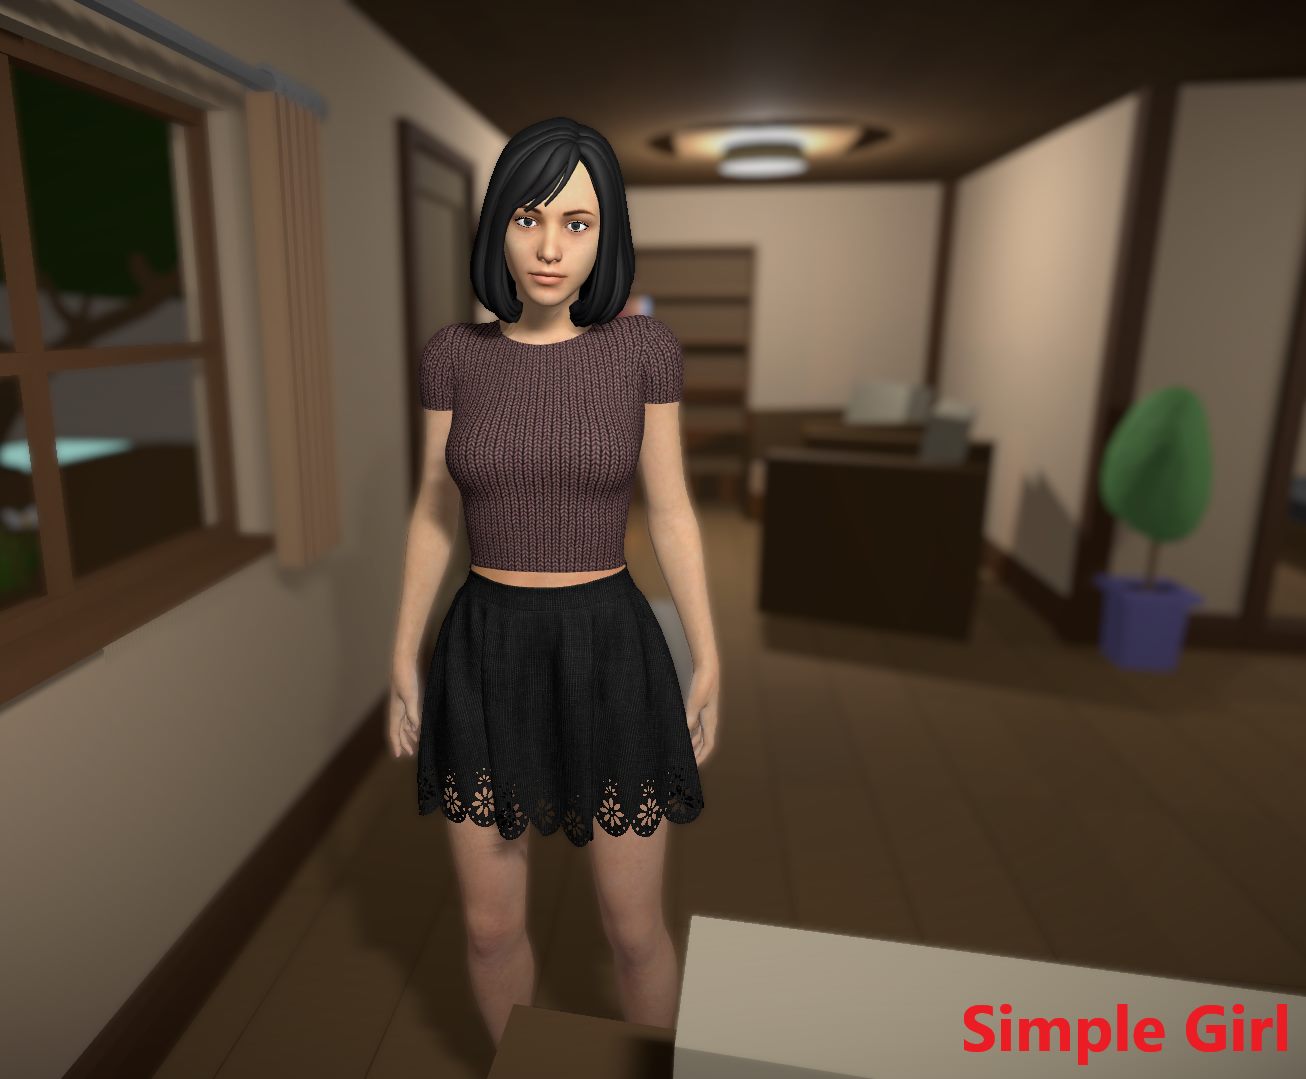 Xxx Simple - Simple Girl Unity Porn Sex Game v.1.39 Download for Windows, Android